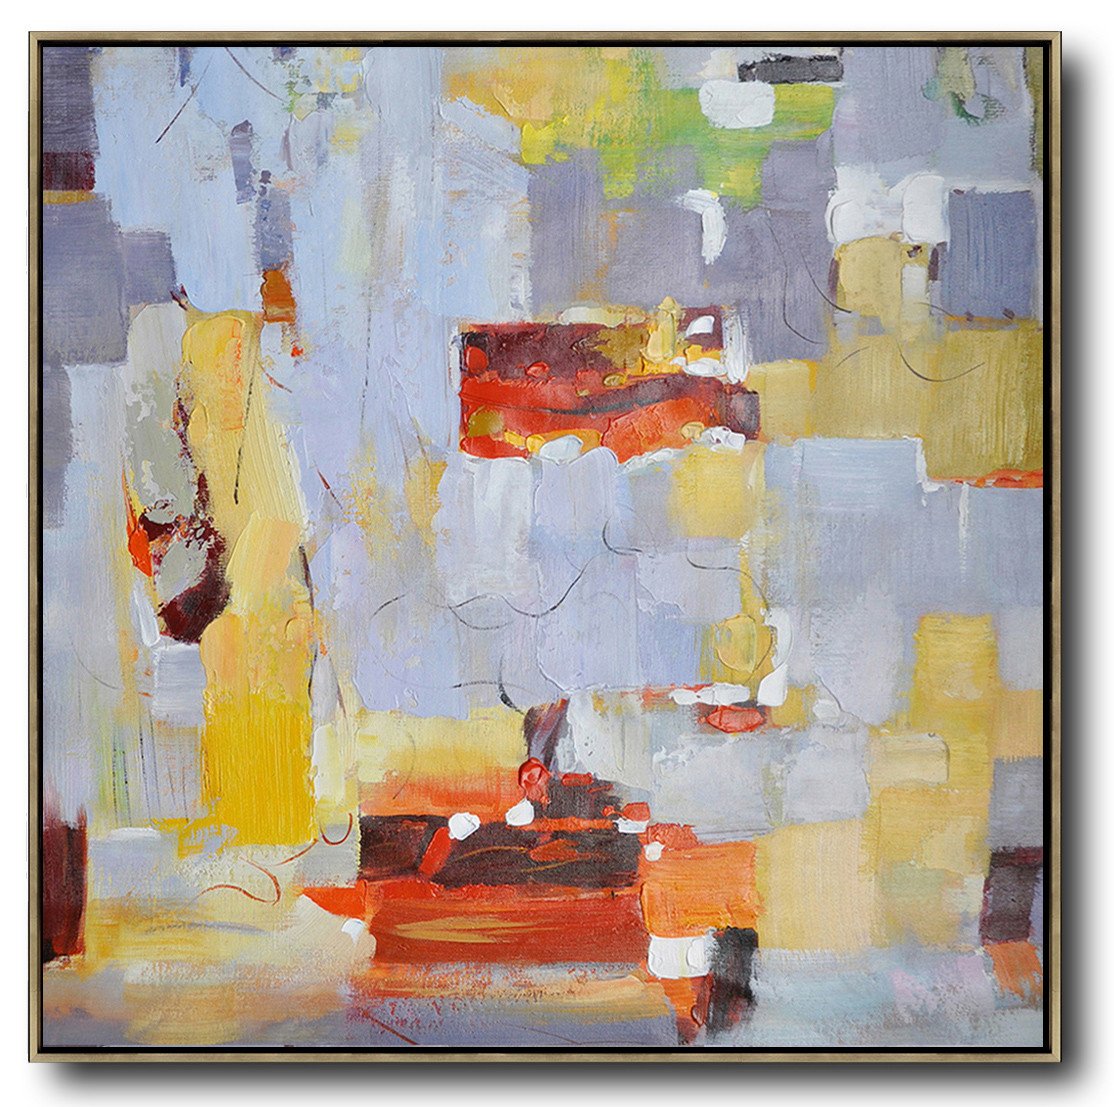 Huge Abstract Painting On Canvas,Oversized Contemporary Art,Custom Oil Painting,Violet Ash,Yellow,Red,Orange.etc